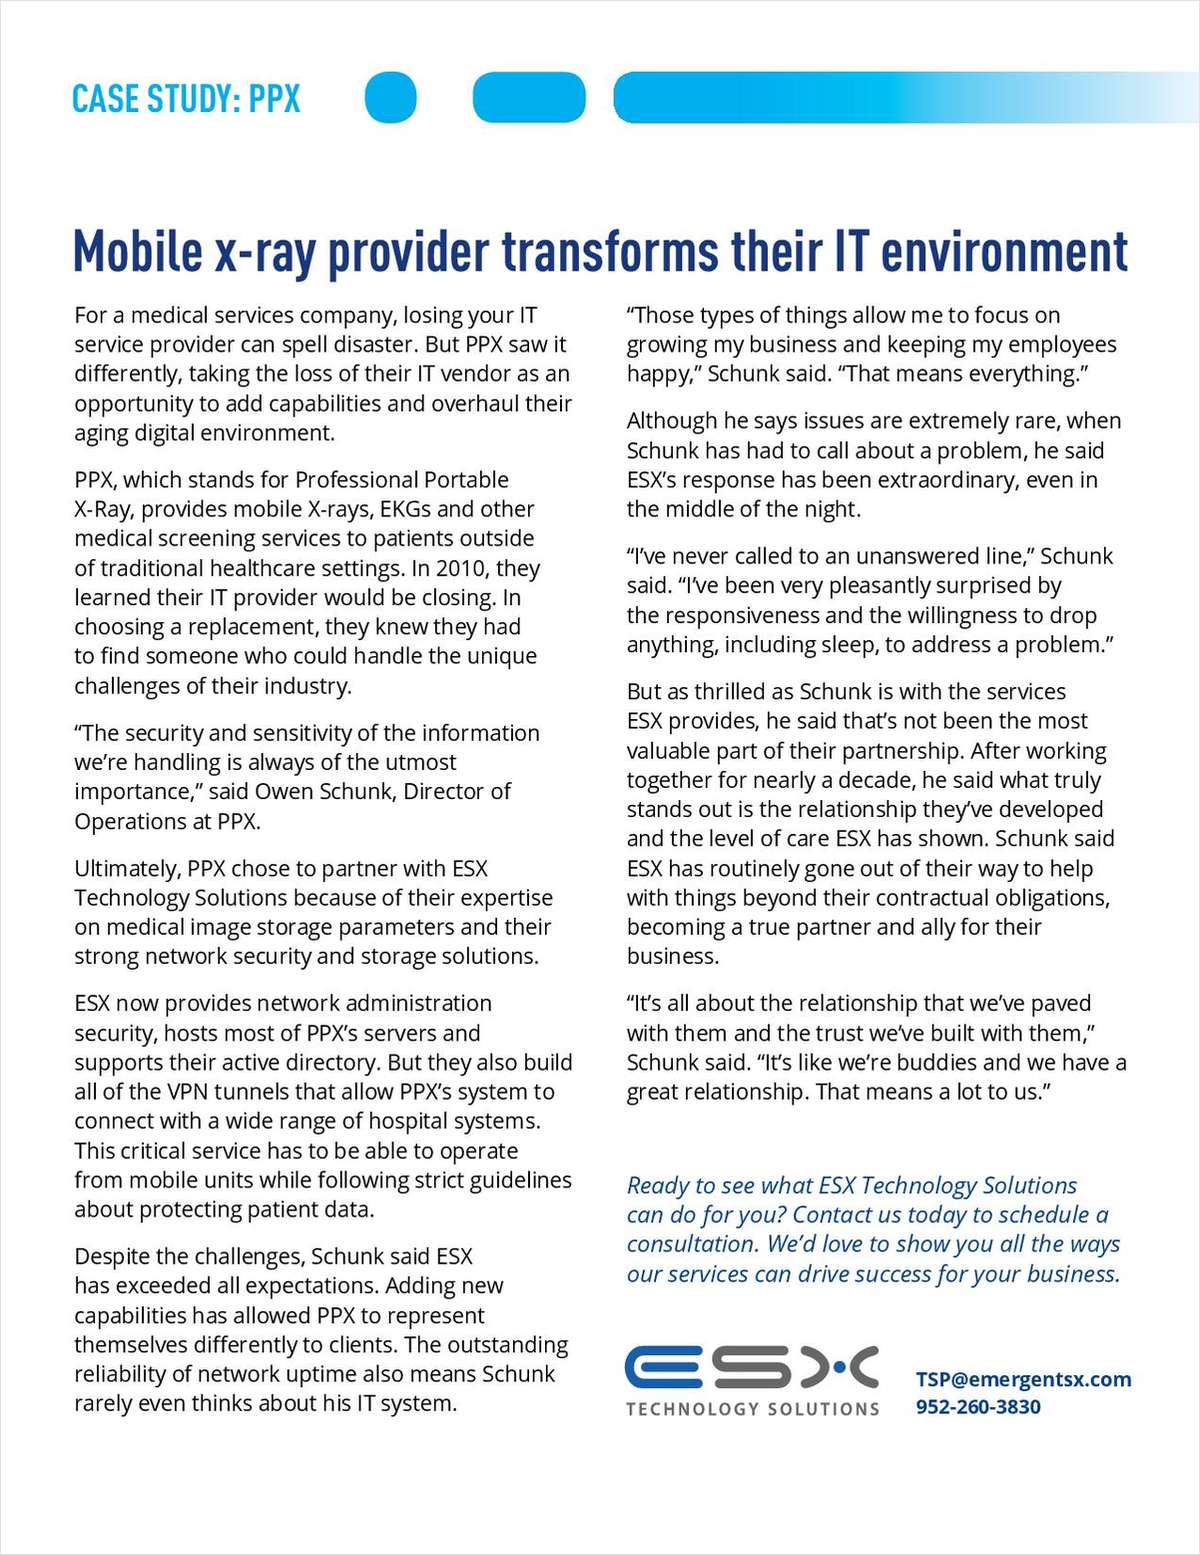 Mobile X-Ray Provider Transforms Their IT Environment